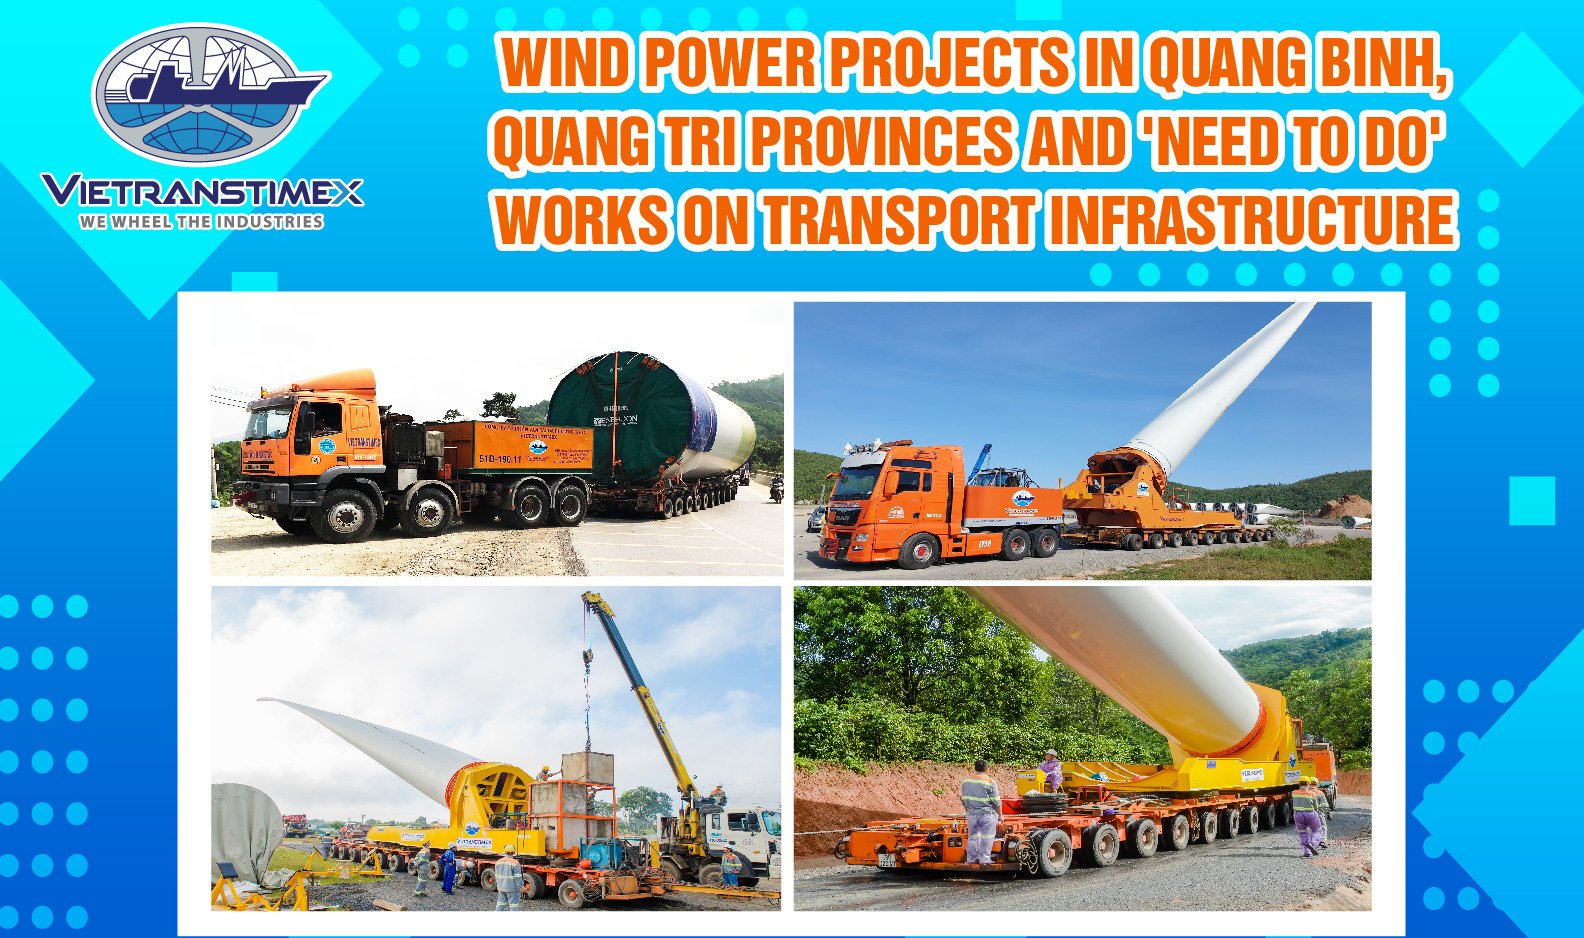 Wind Power Projects In Quang Binh, Quang Tri Provinces And 'Need To Do' Works On Transport Infrastructure